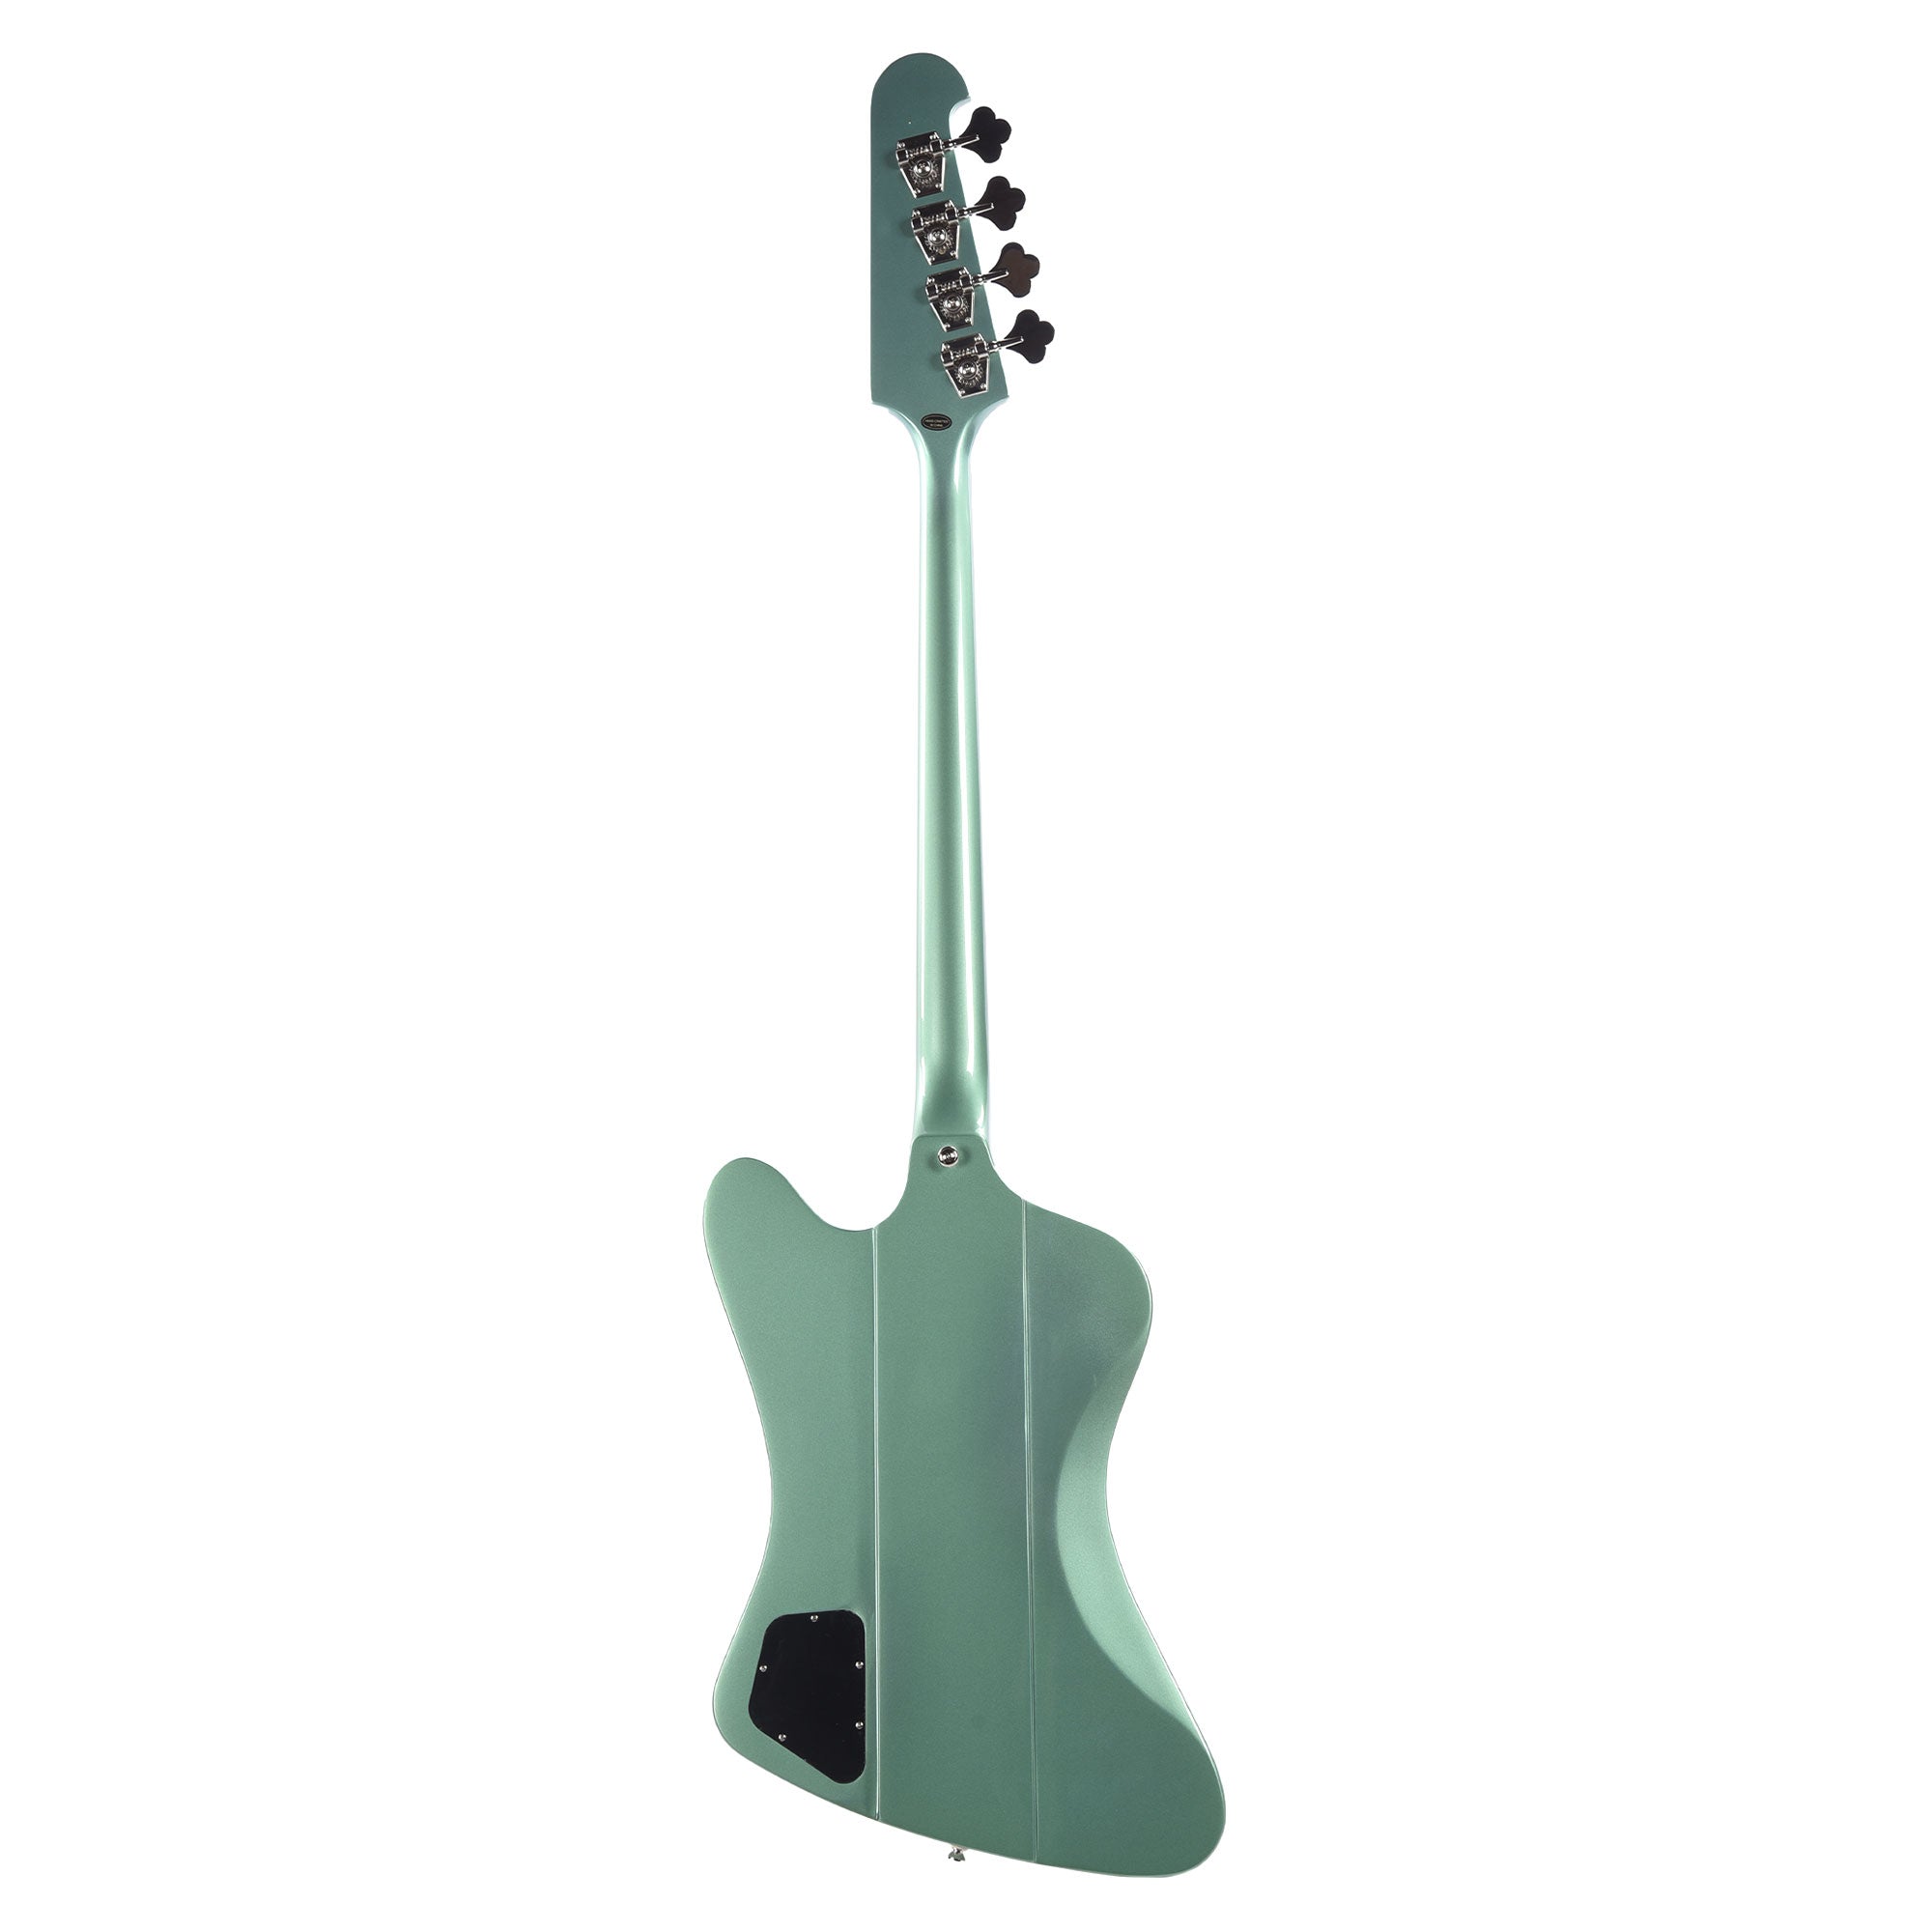 Epiphone Inspired by Gibson Thunderbird '64 Inverness Green